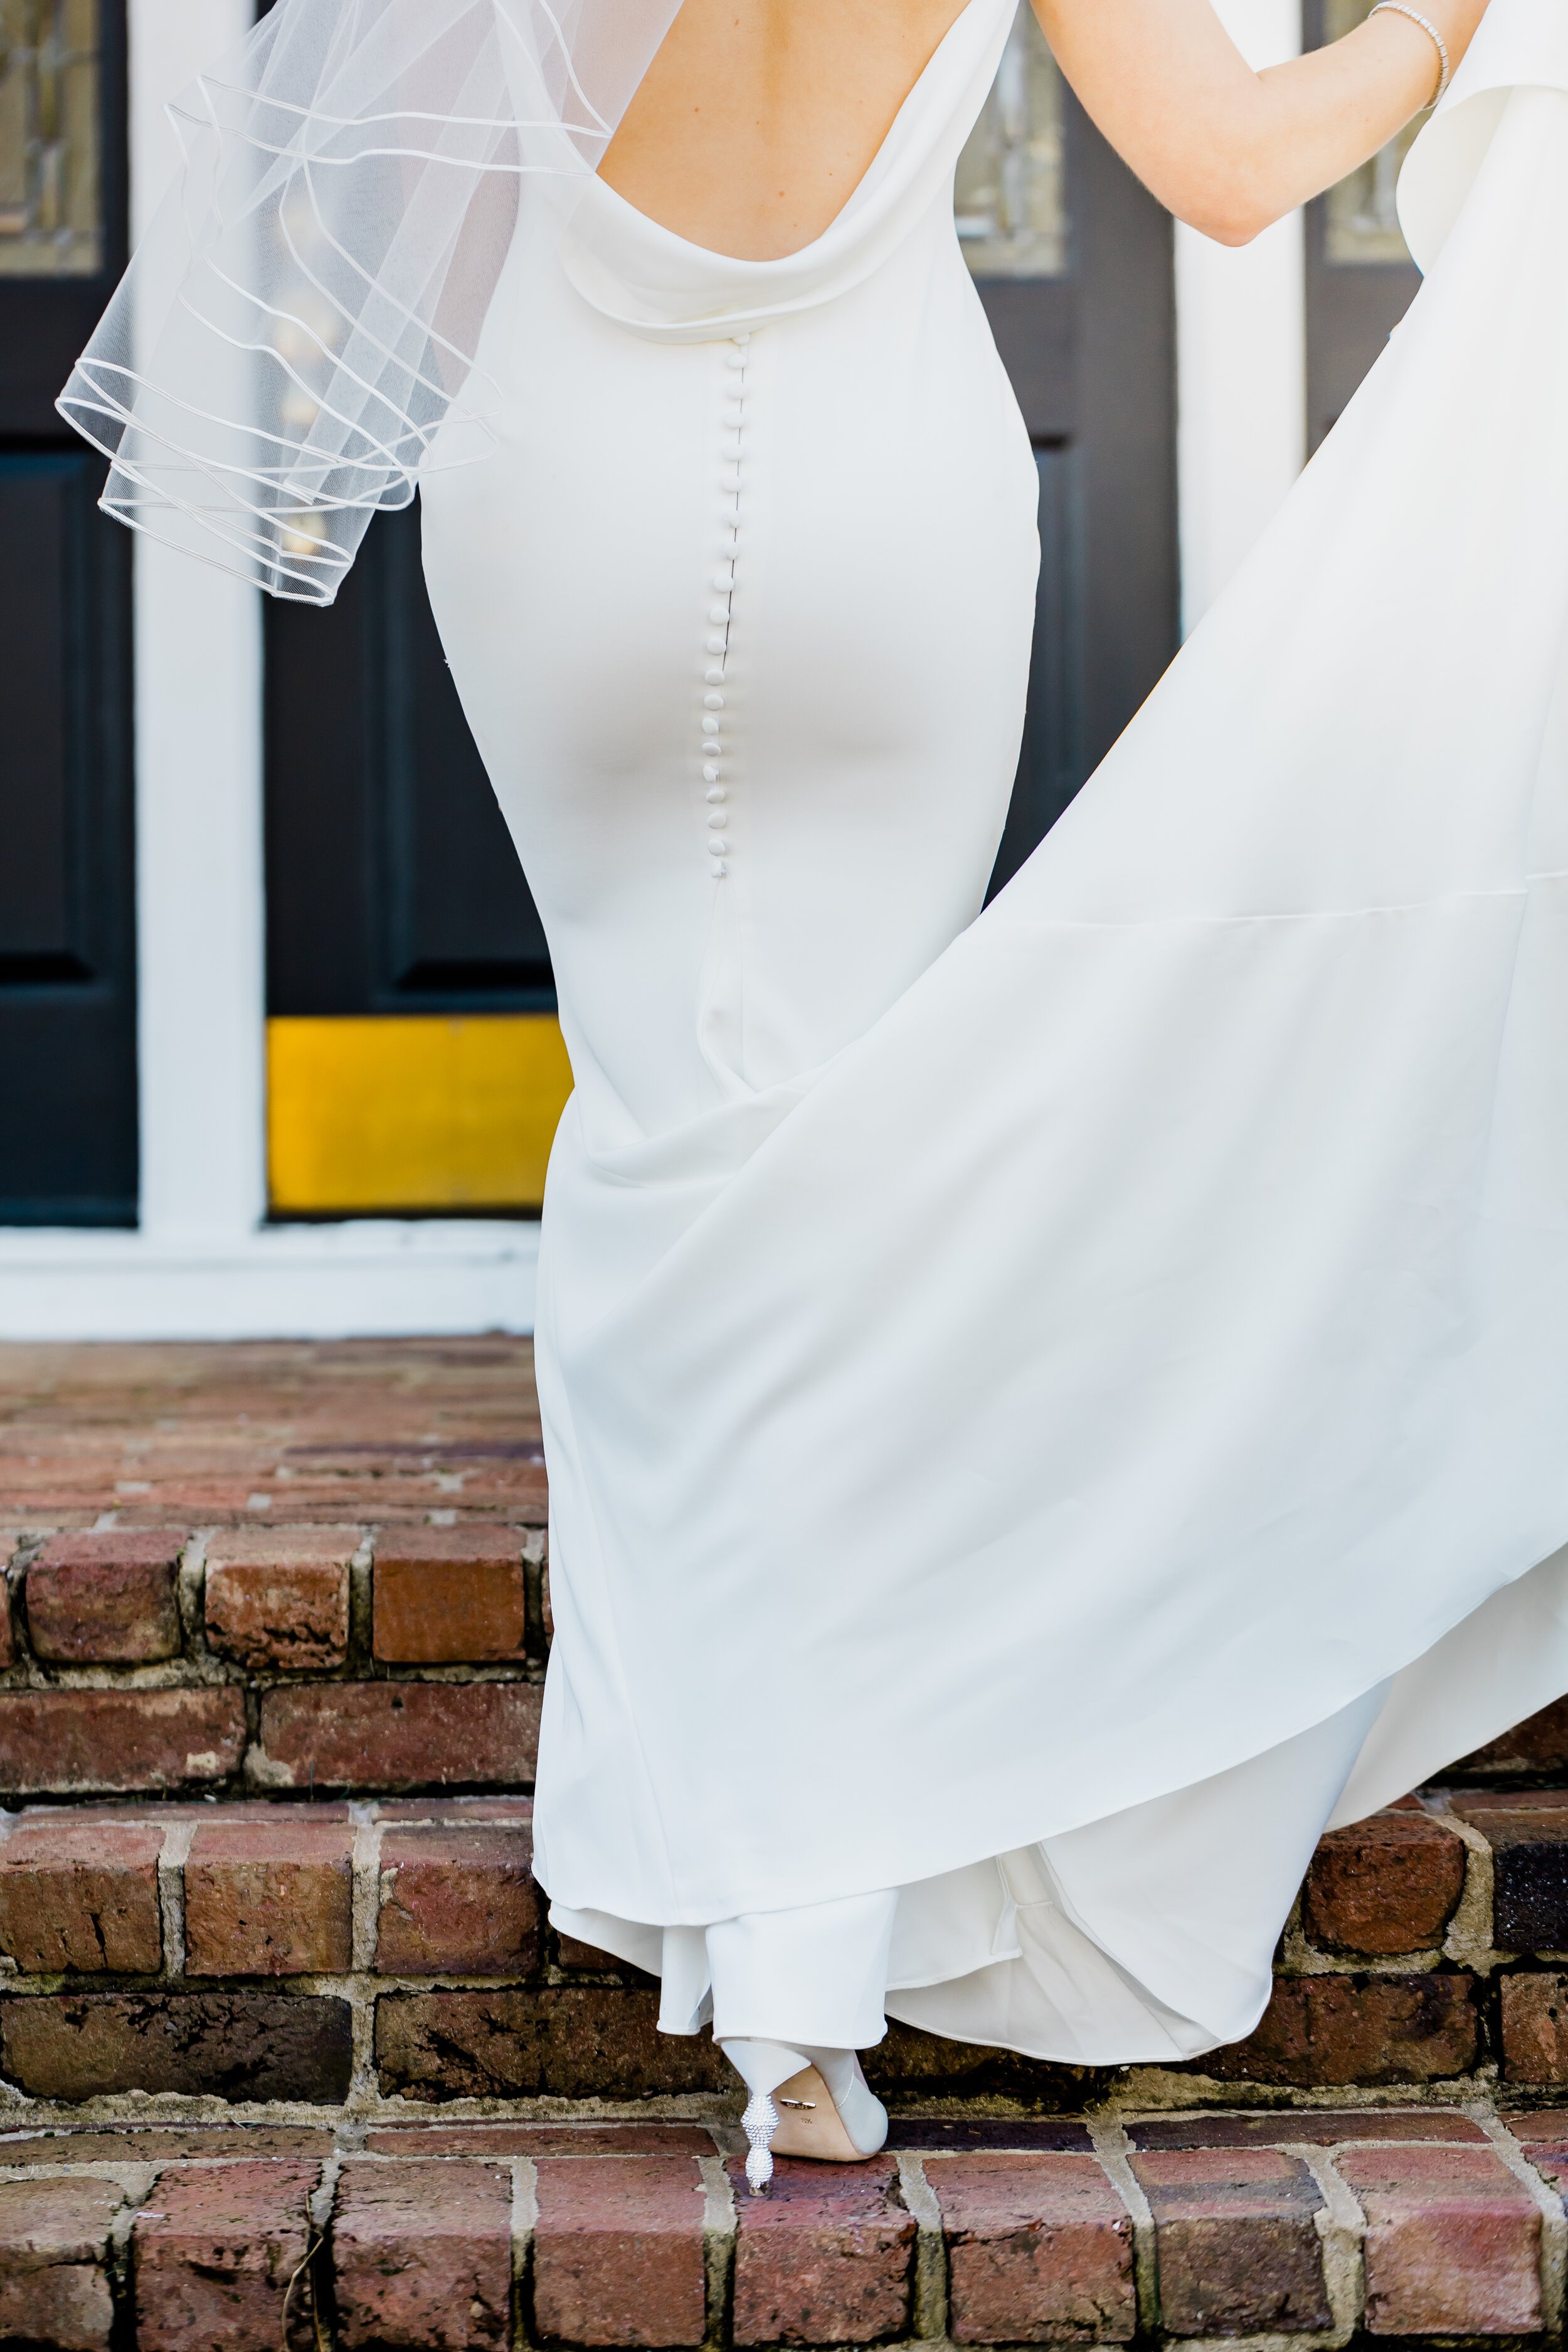 ivory-and-beau-bride-bailey-down-for-the-gown-blog-wedding-blog-bridal-blog-real-bride-in-archie-by-made-with-love-wedding-dress-crepe-bridal-gown-fitted-sleek-smooth-simple-modern-wedding-gown-bridal-shop-bridal-boutique-savannah-georgia-Portrait-242.jpg